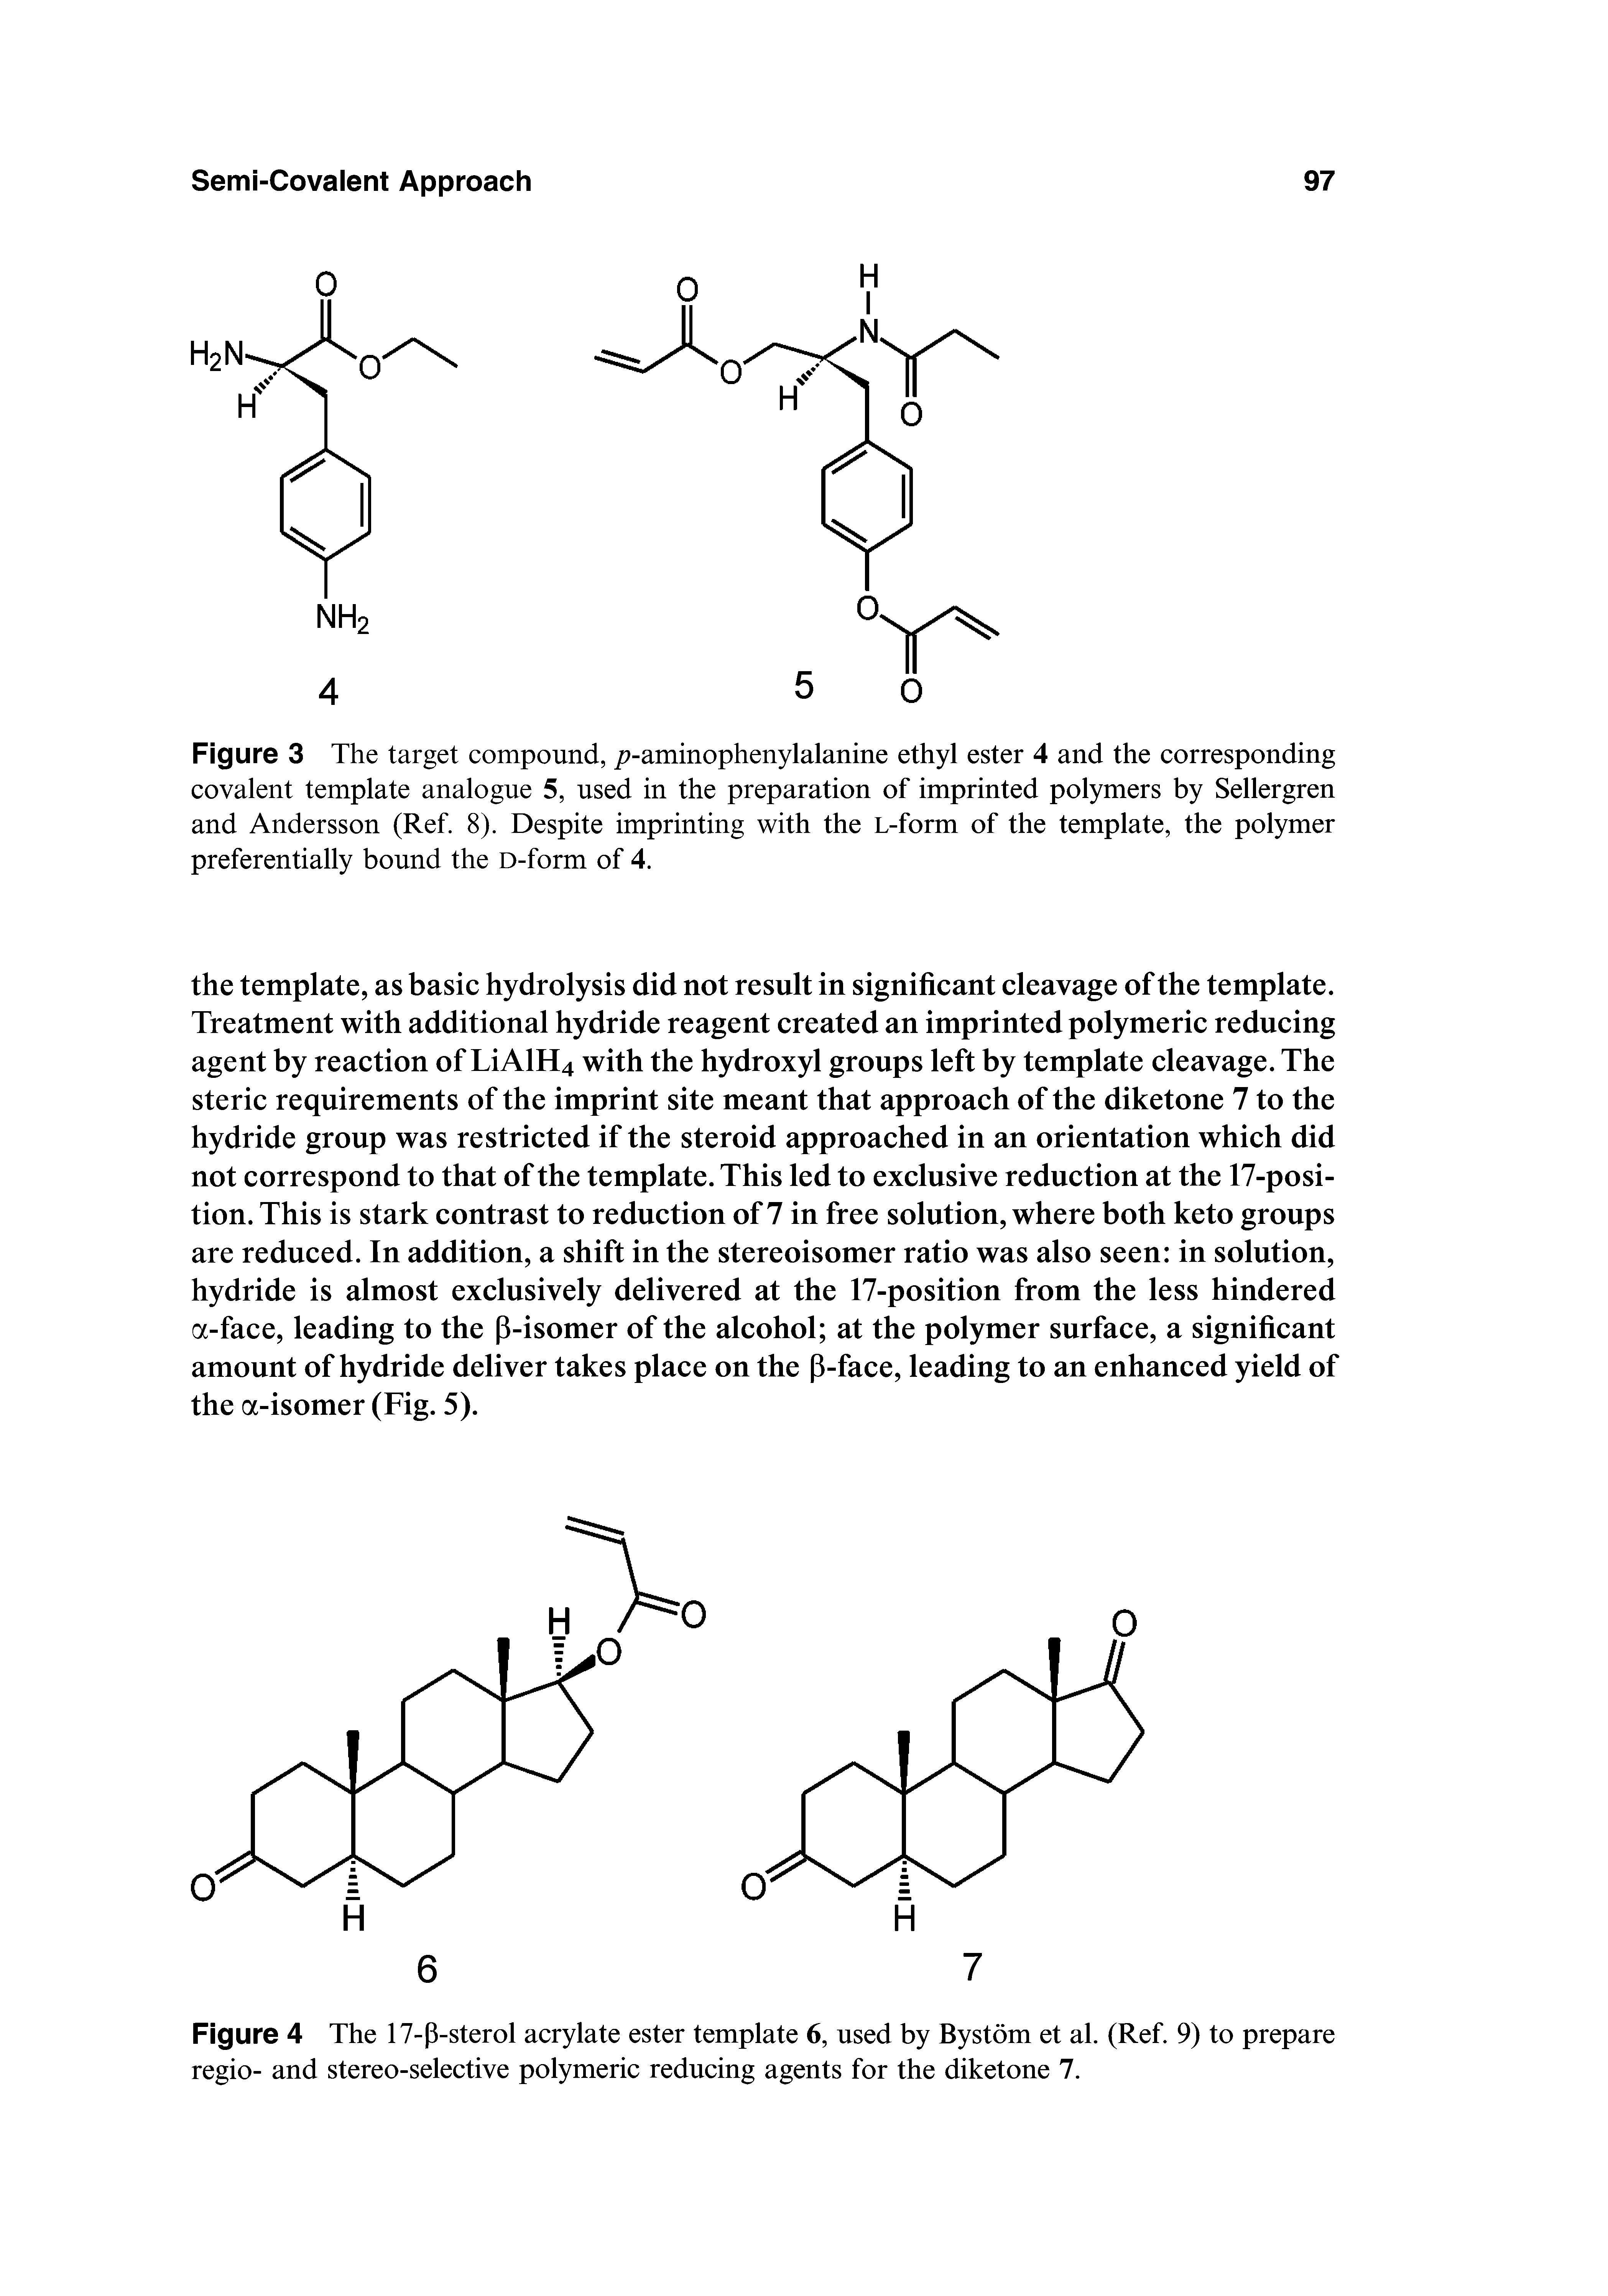 Figure 4 The 17-P-sterol acrylate ester template 6, used by Bystom et al. (Ref. 9) to prepare regio- and stereo-selective polymeric reducing agents for the diketone 7.